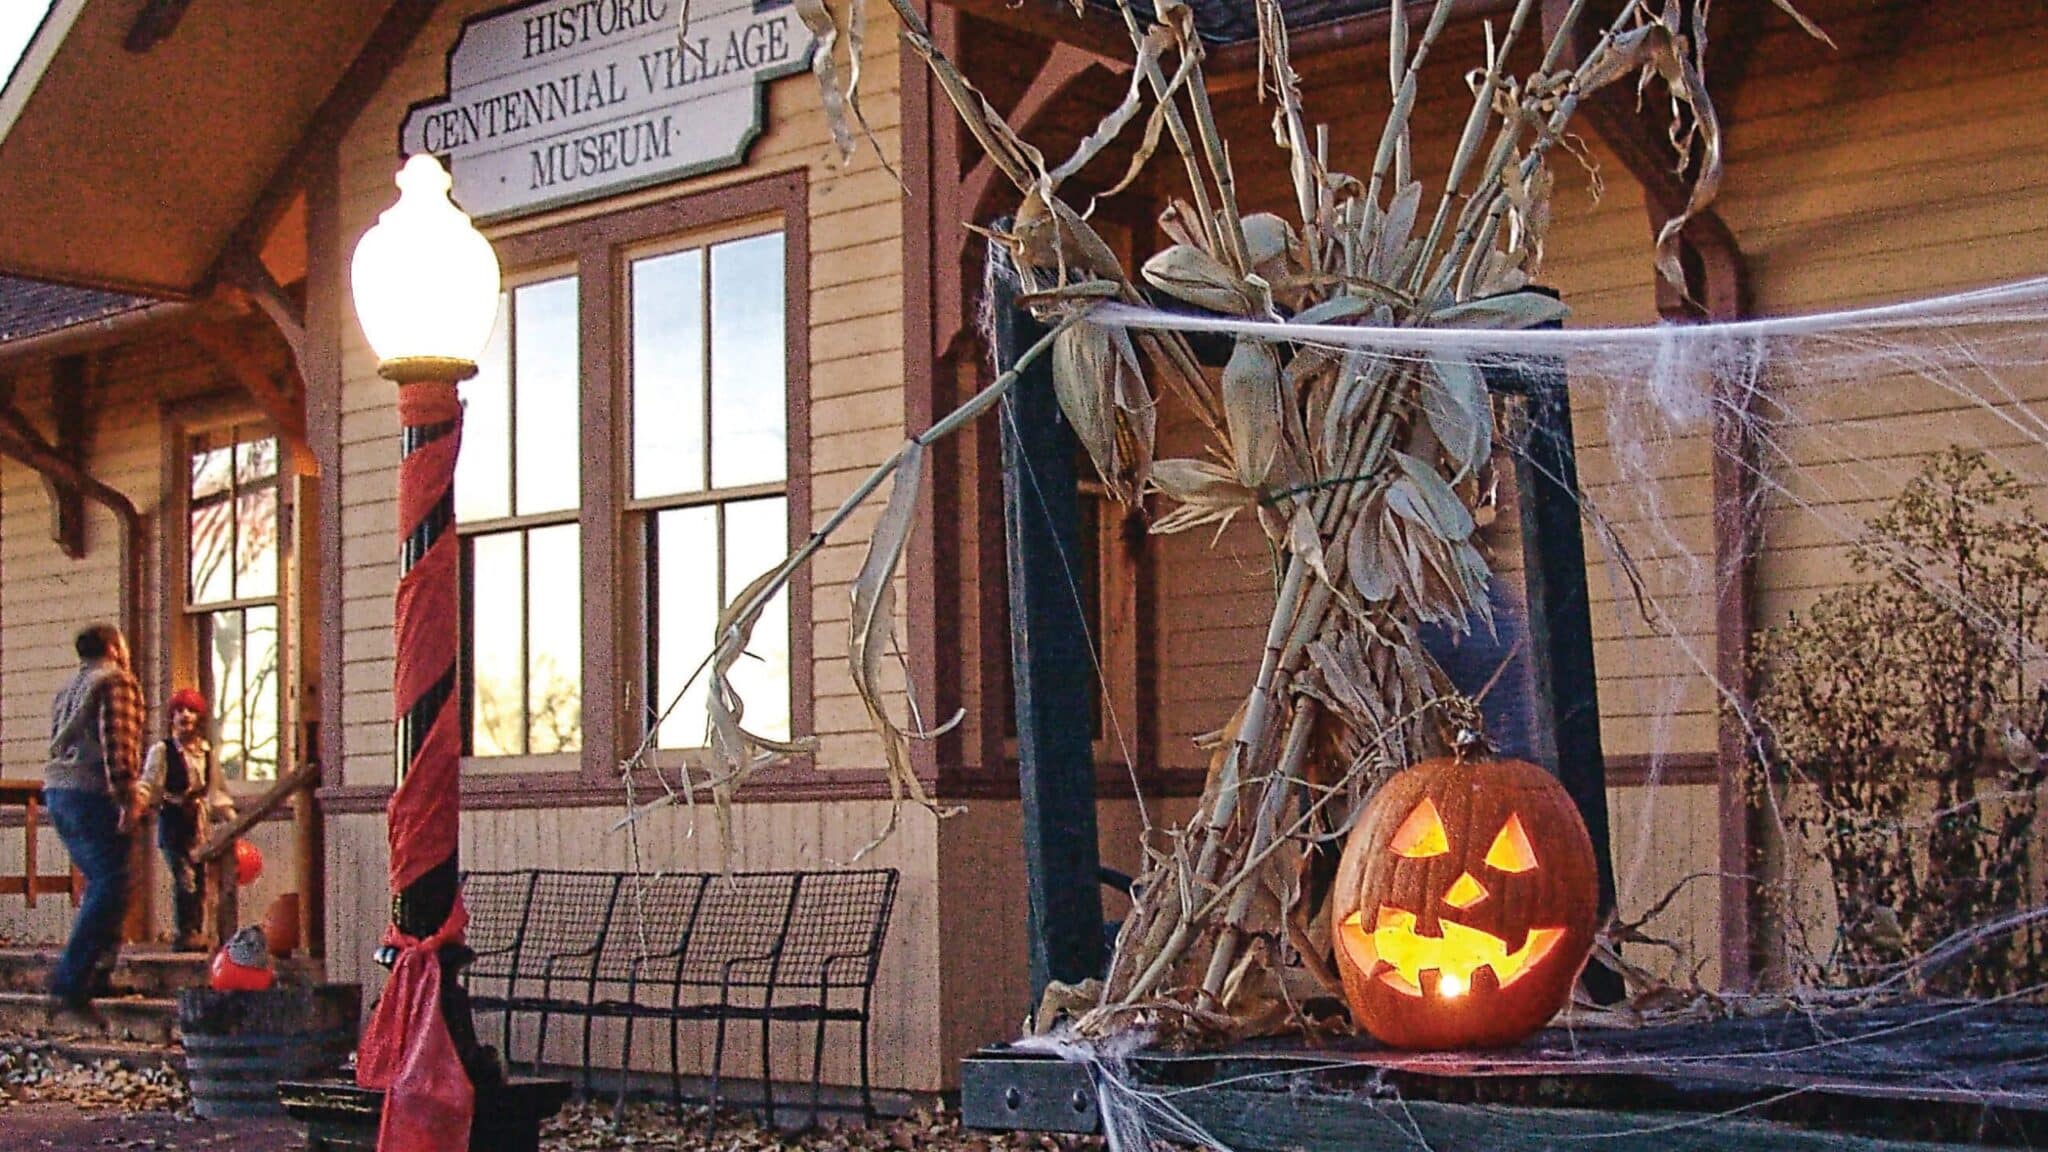 An outdoor photo of the entrance to the Historic Centennial Village Museum in Greeley, Colorado. The museum is decorated for fall with cornstalks, cobwebs, and a lit jack-o-lanturn,